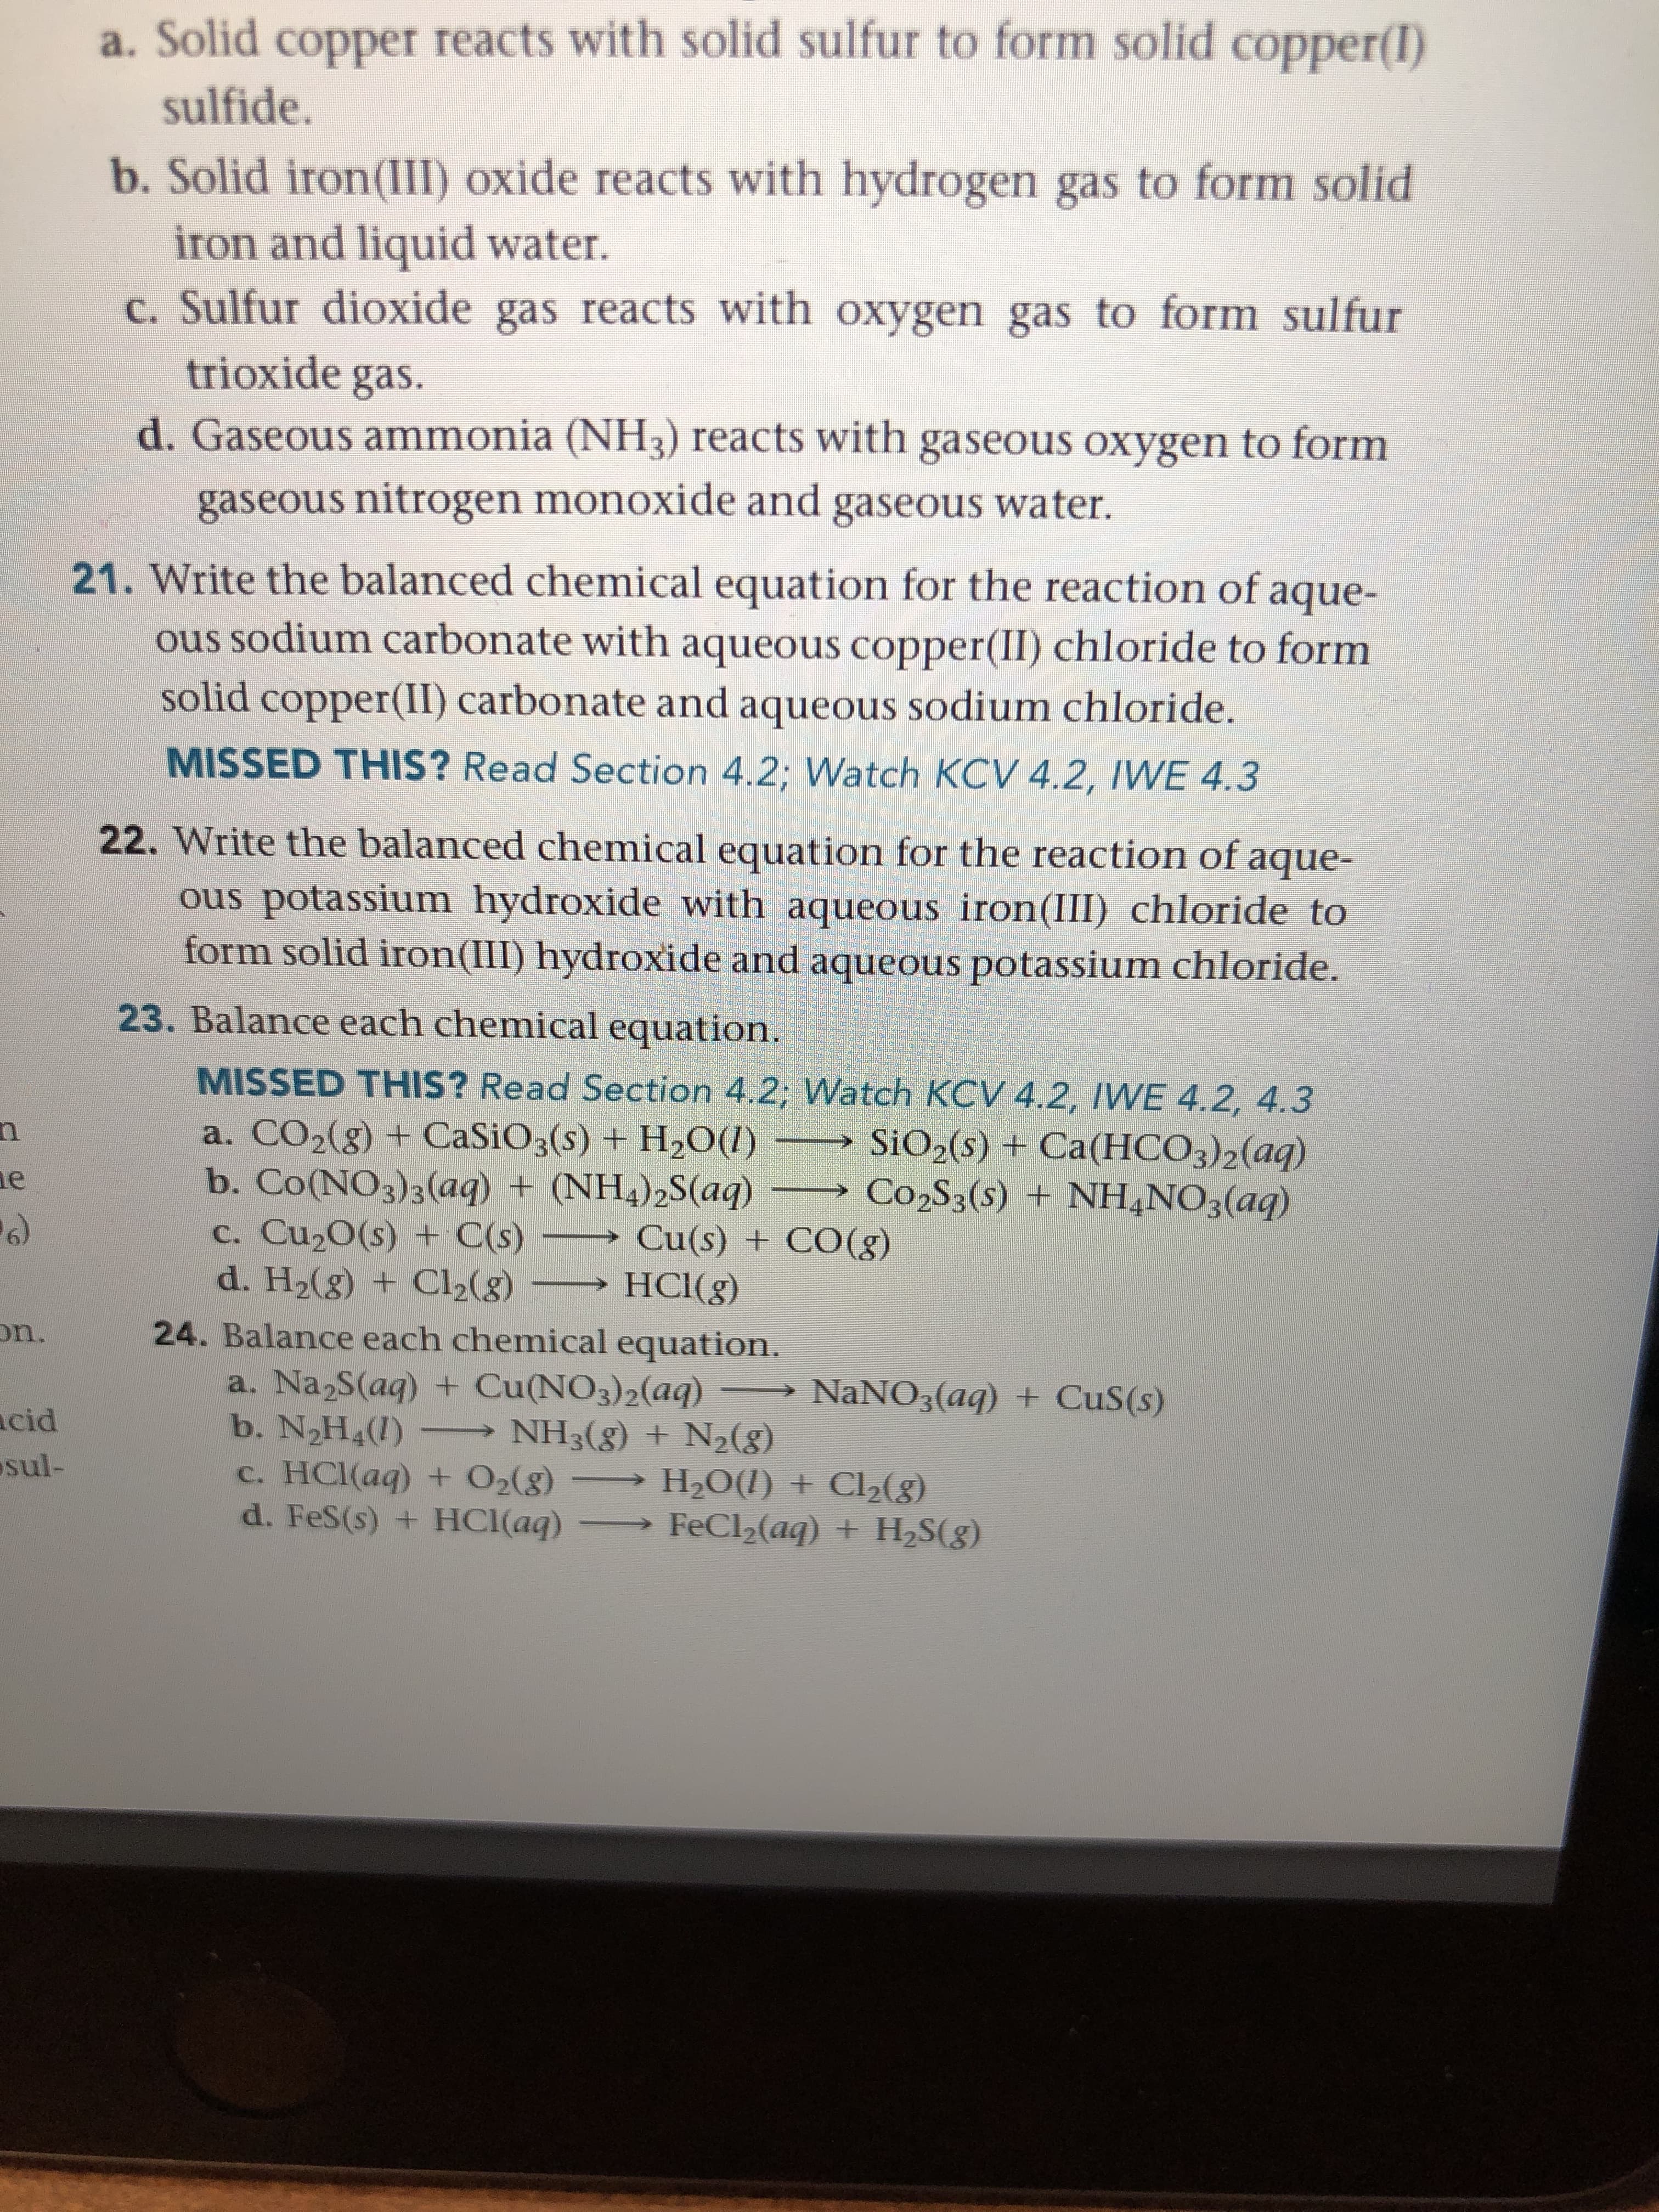 23. Balance each chemical equation.
MISSED THIS? Read Section 4.2; Watch KCV 4.2, IWE 4.2, 4.3
a. CO2(g) + CaSiO3(s) + H2O(1)
b. Co(NO3)3(aq) + (NH4)2S(aq)
c. Cu20(s) + C(s)
d. H2(g) + Cl2(8)
→ SIO2(s) + Ca(HCO3)2(aq)
Co2S3(s) + NH,NO3(aq)
→ Cu(s) + CO(g)
HCl(g)
